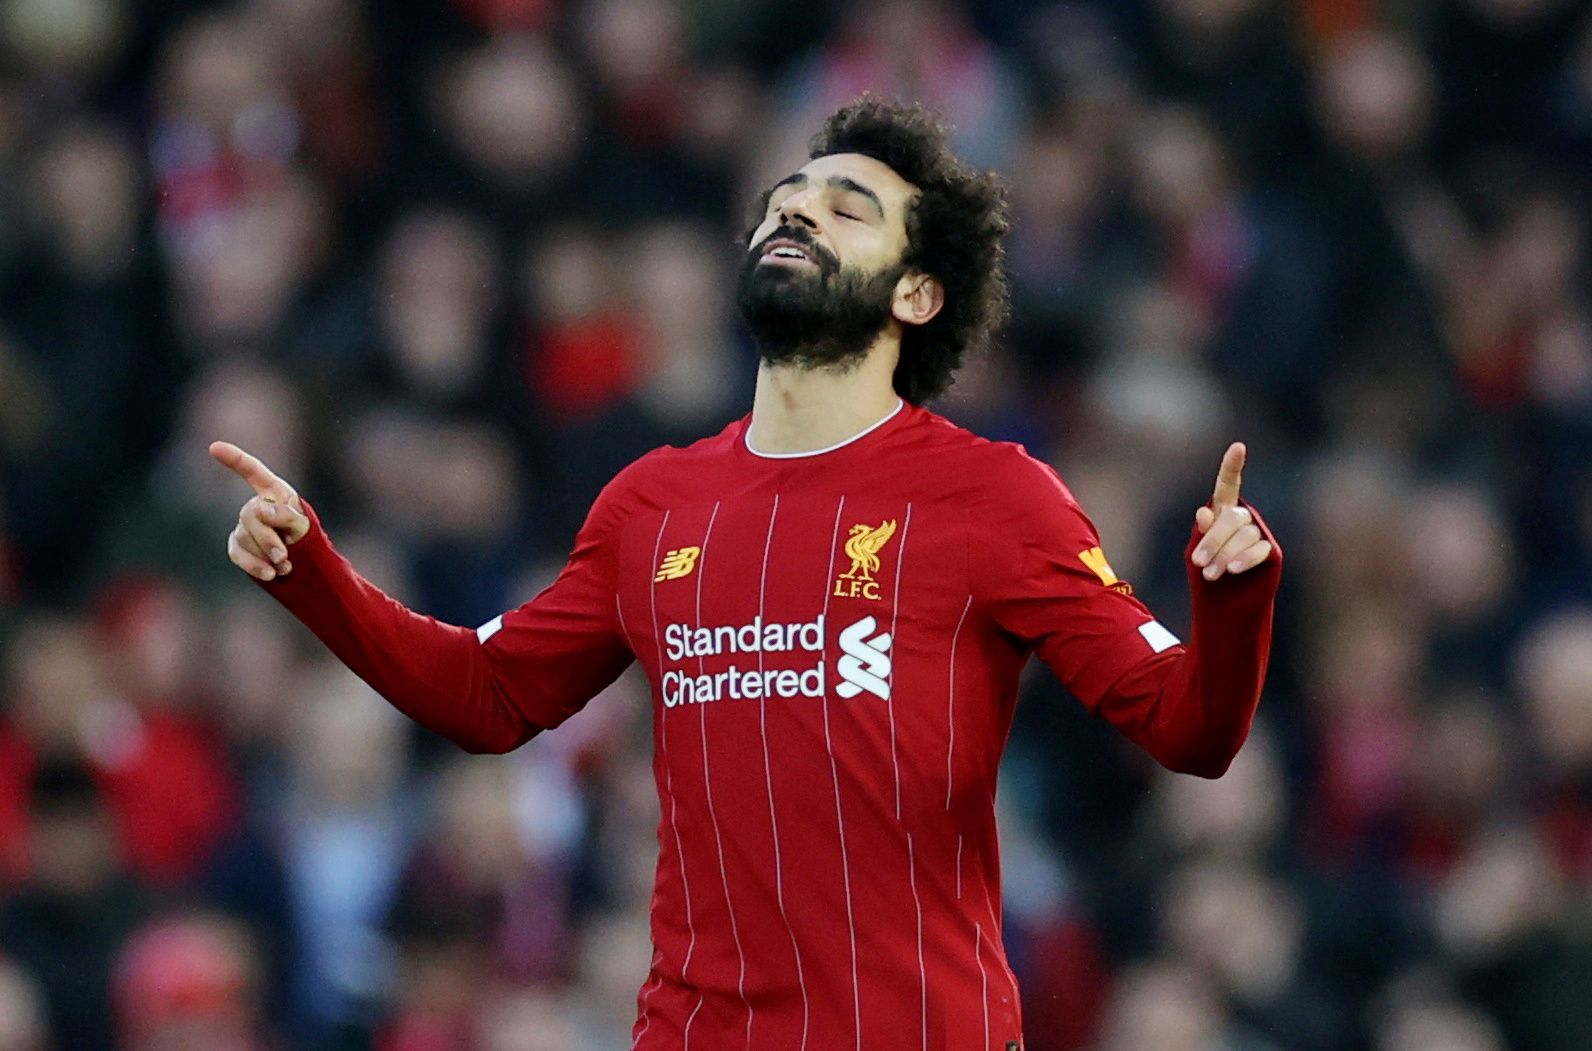 Soccer Football - Premier League - Liverpool v Southampton - Anfield, Liverpool, Britain - February 1, 2020  Liverpool's Mohamed Salah celebrates scoring their third goal   Action Images via Reuters/Carl Recine  EDITORIAL USE ONLY. No use with unauthorized audio, video, data, fixture lists, club/league logos or 